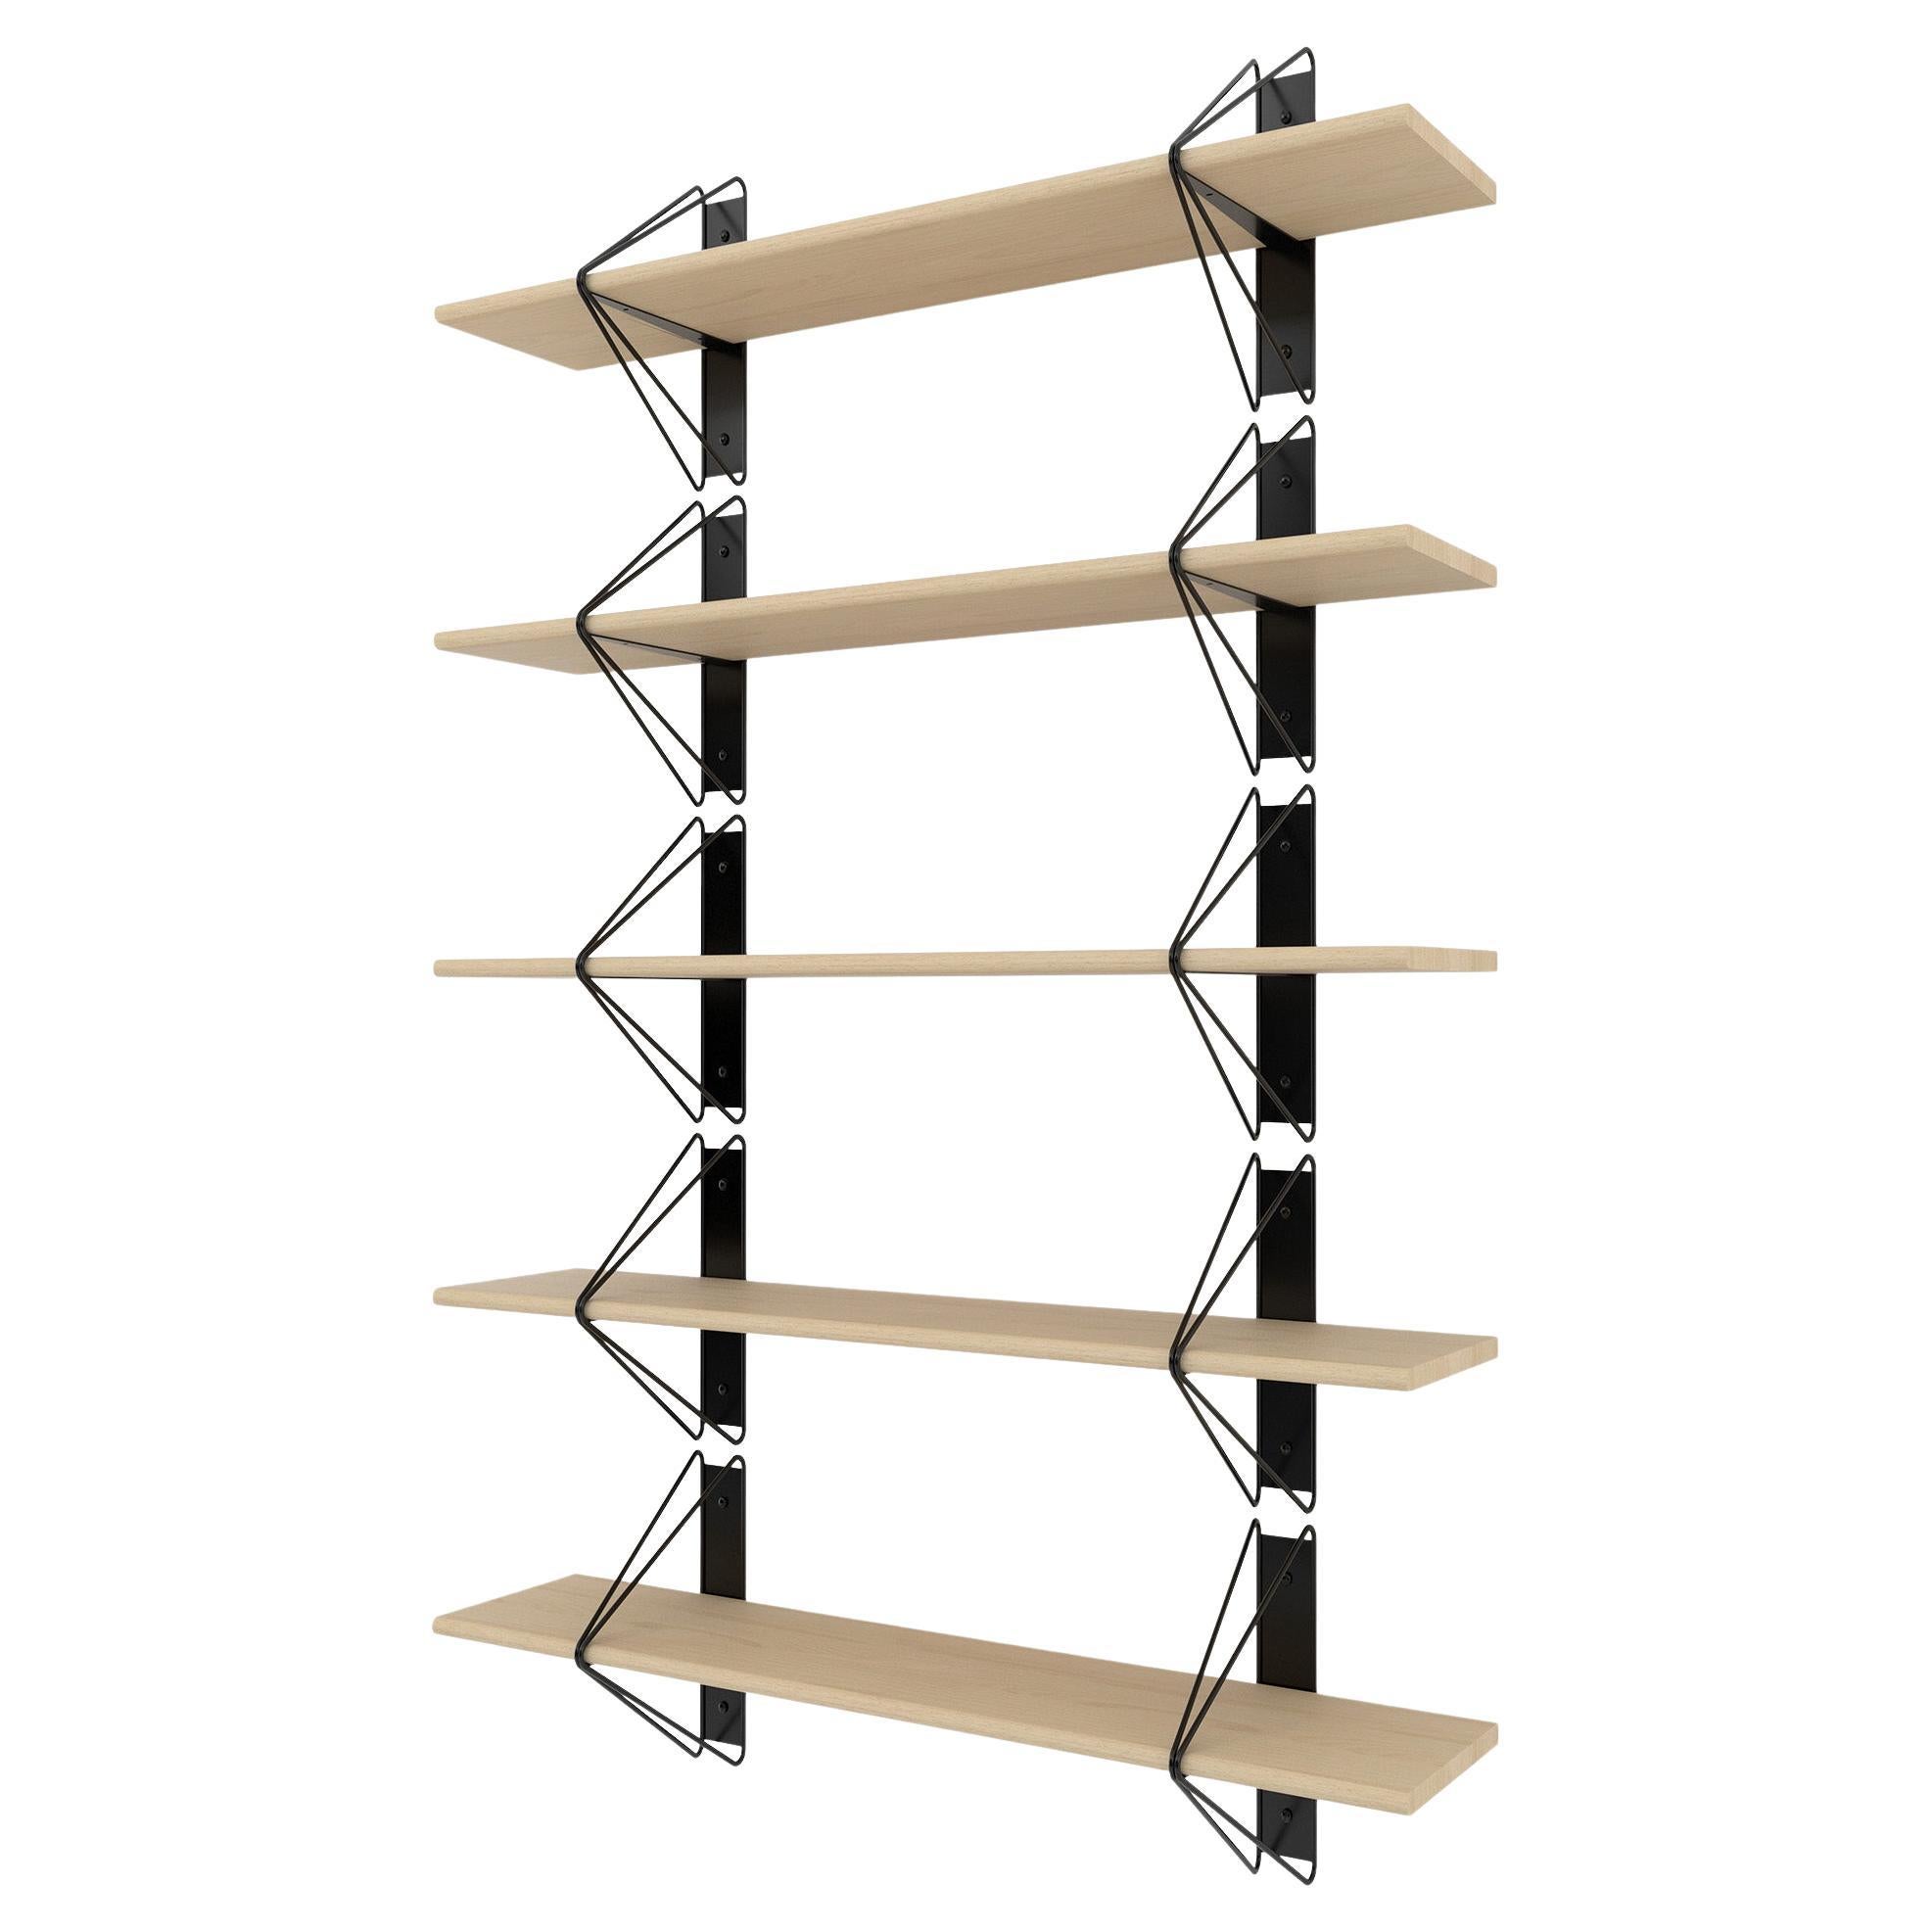 Set of 5 Strut Shelves from Souda, 52in, Black and Maple, Made to Order